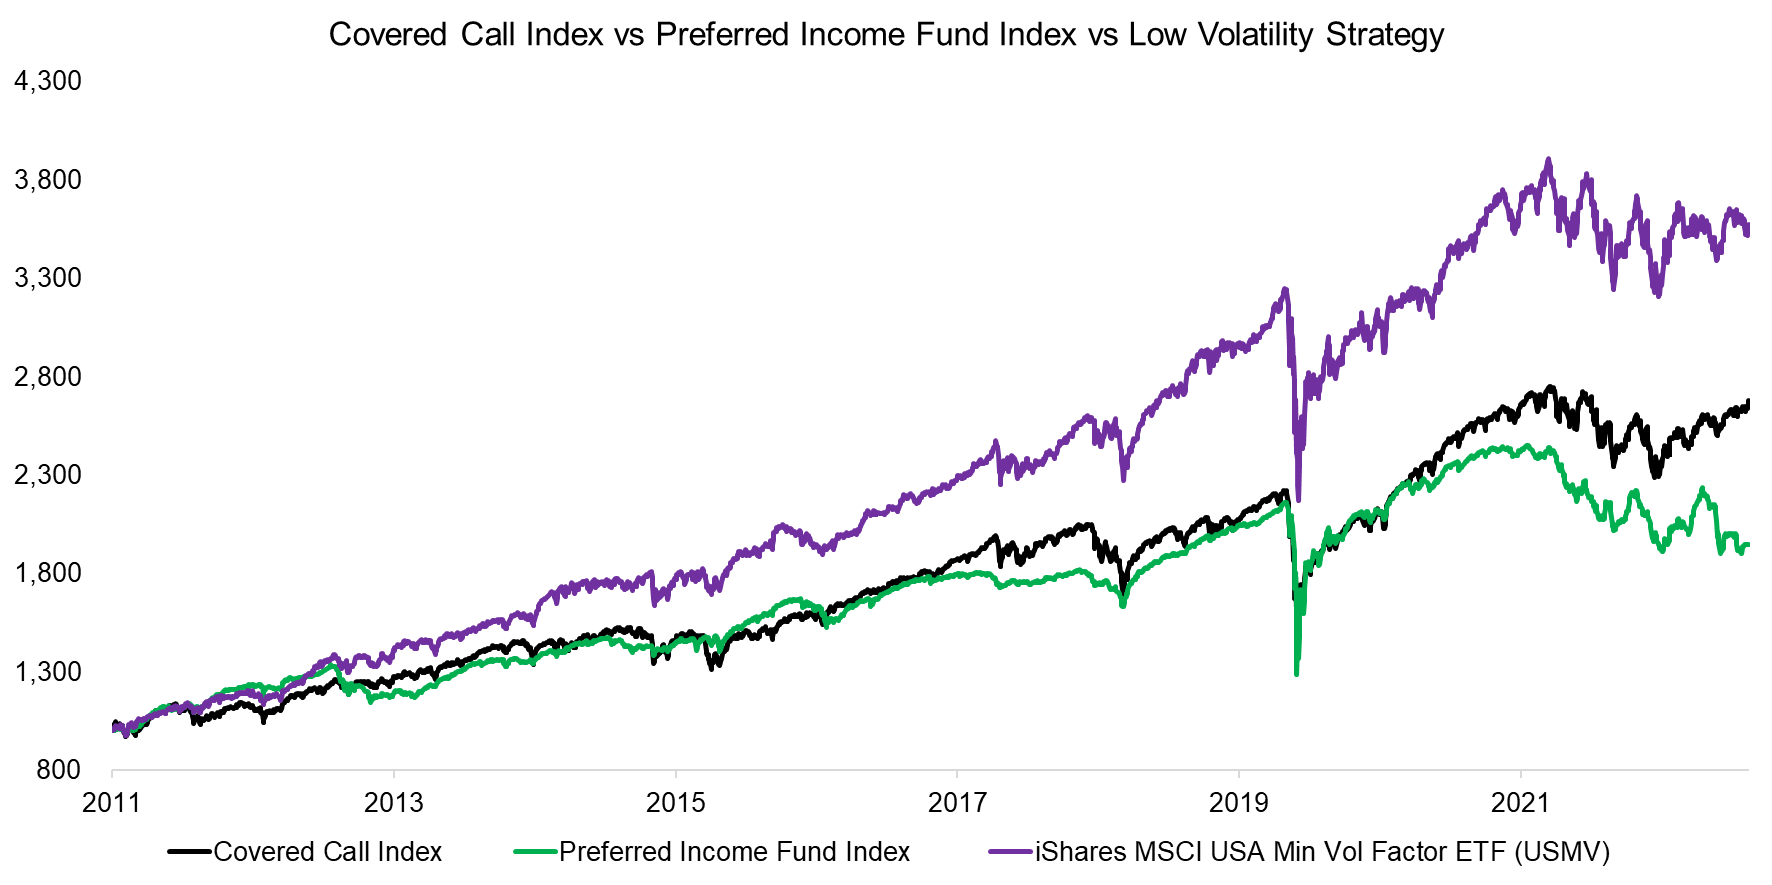 Covered Call Index vs Preferred Income Fund Index vs Low Volatility Strategy